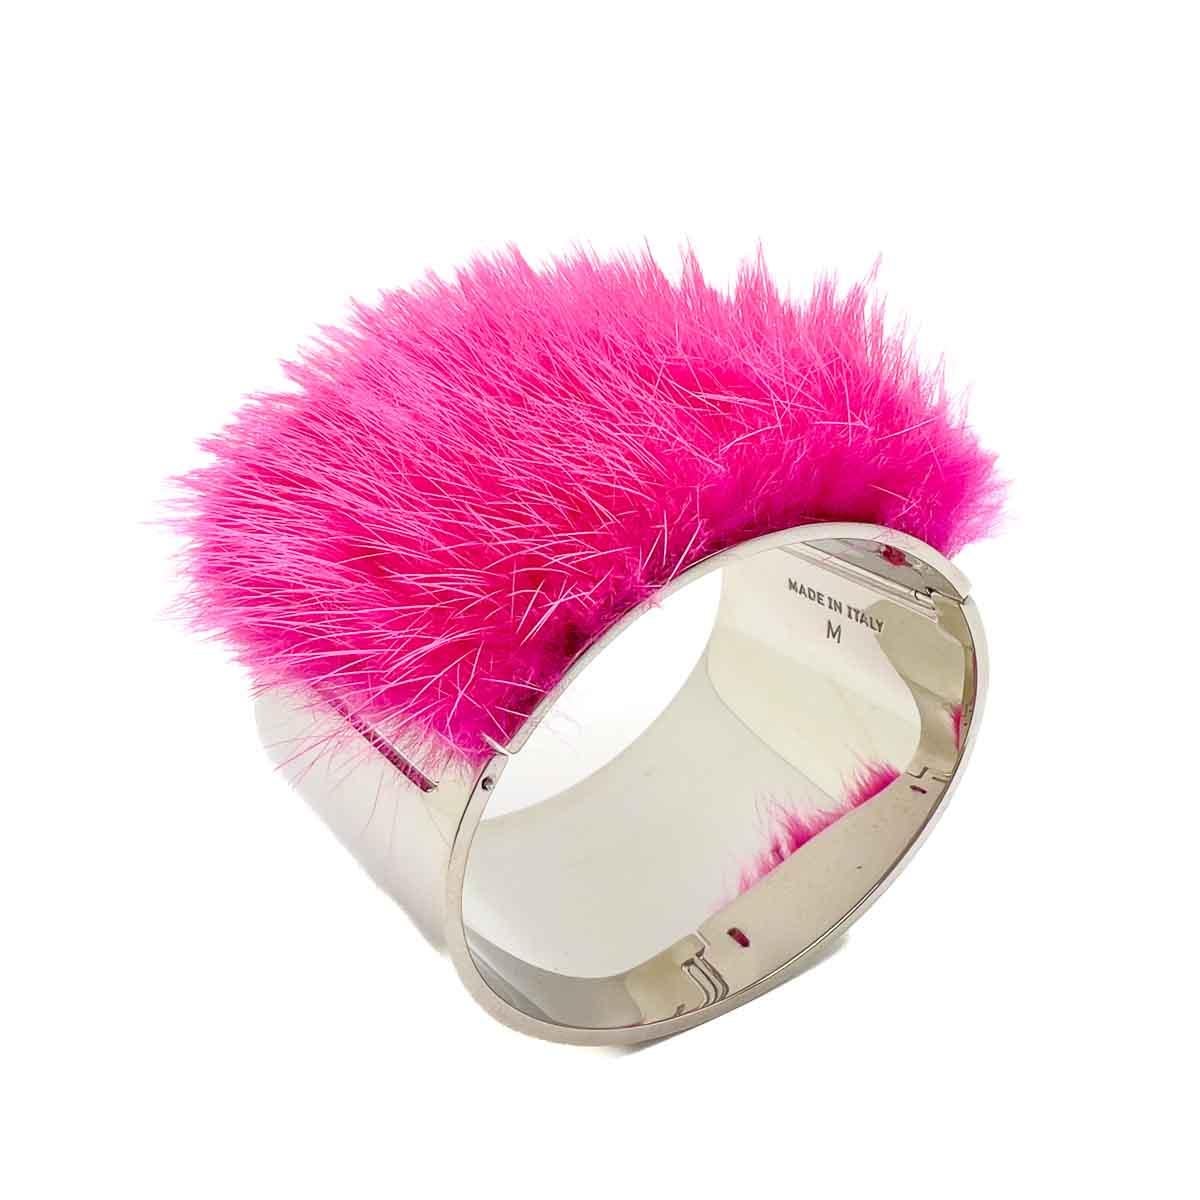 A striking Fendi Pink Cuff. A large contemporary style cuff with a dramatic twist of shocking pink fur to finish.

Vintage Condition: Very good without damage or noteworthy wear.
Materials: Rhodium plated metal, fur
Signed: Fendi
Fastening: Snap